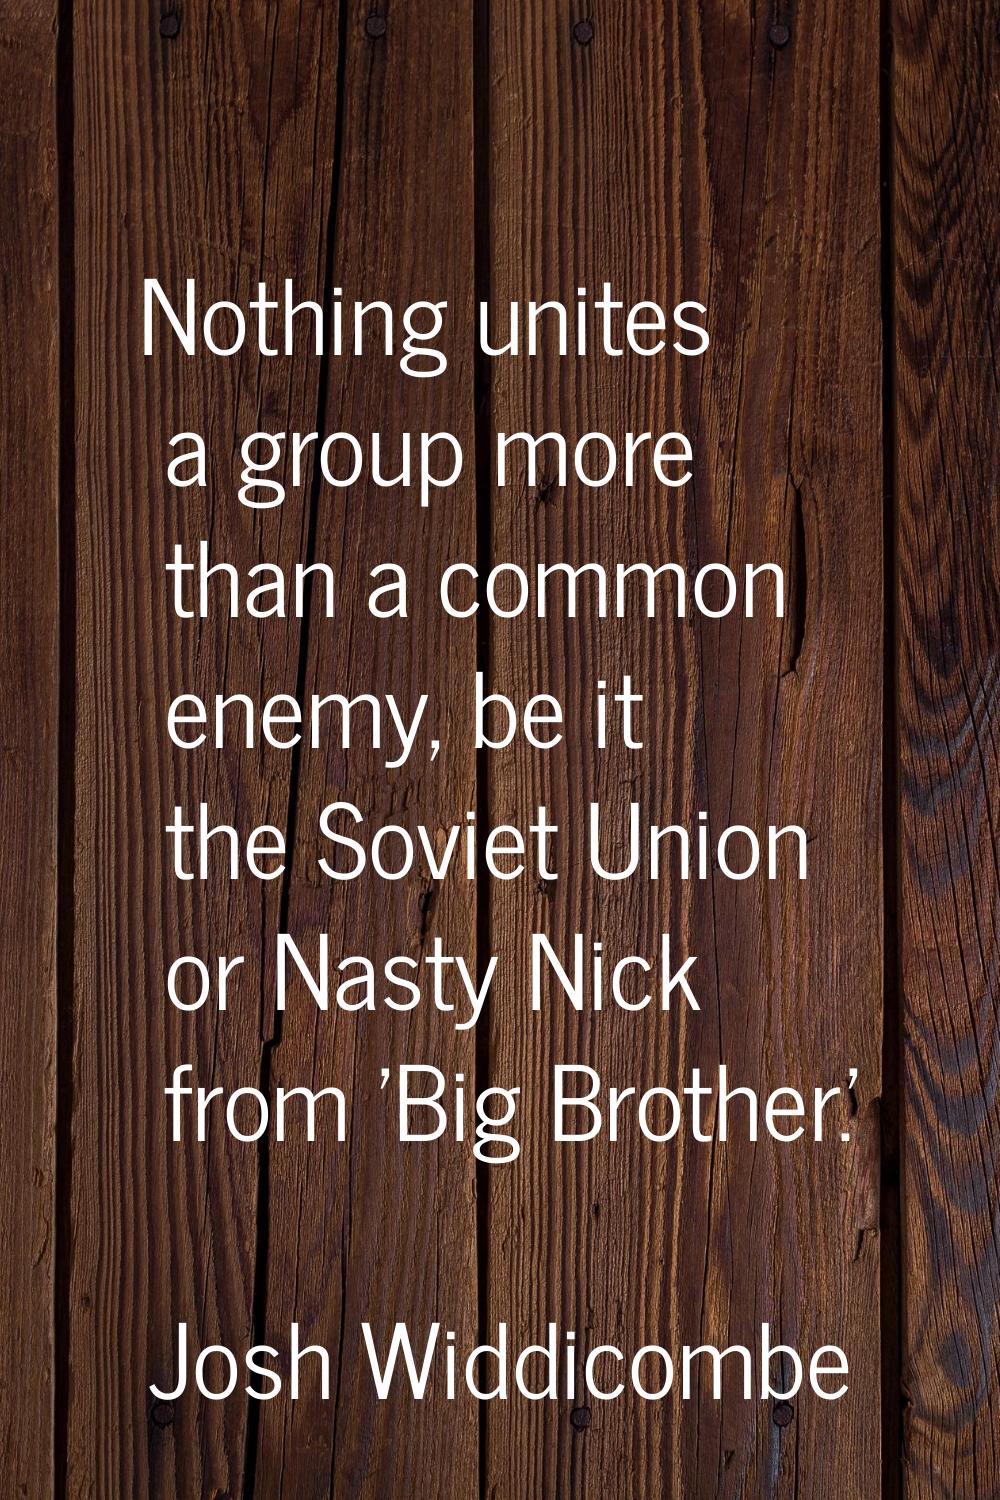 Nothing unites a group more than a common enemy, be it the Soviet Union or Nasty Nick from 'Big Bro